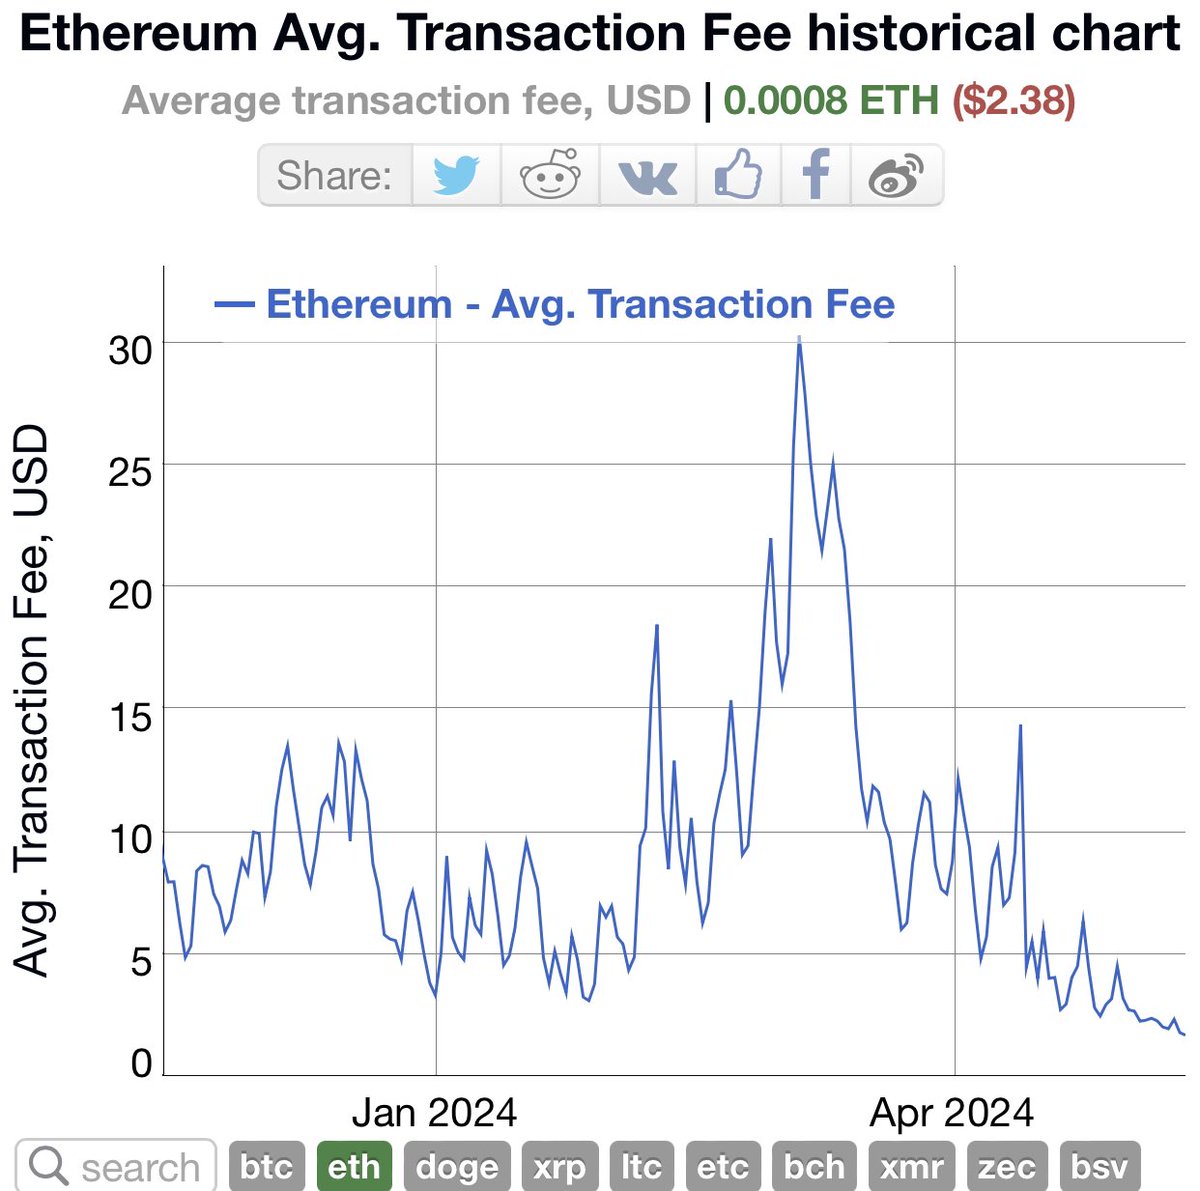 Ethereum fees have dropped by around 93% to around 6 gwei from the $30 peak 6 months ago. Right now, it costs around $5 to swap an asset, $9 to mint an NFT, and $2 to cross-chain bridge.